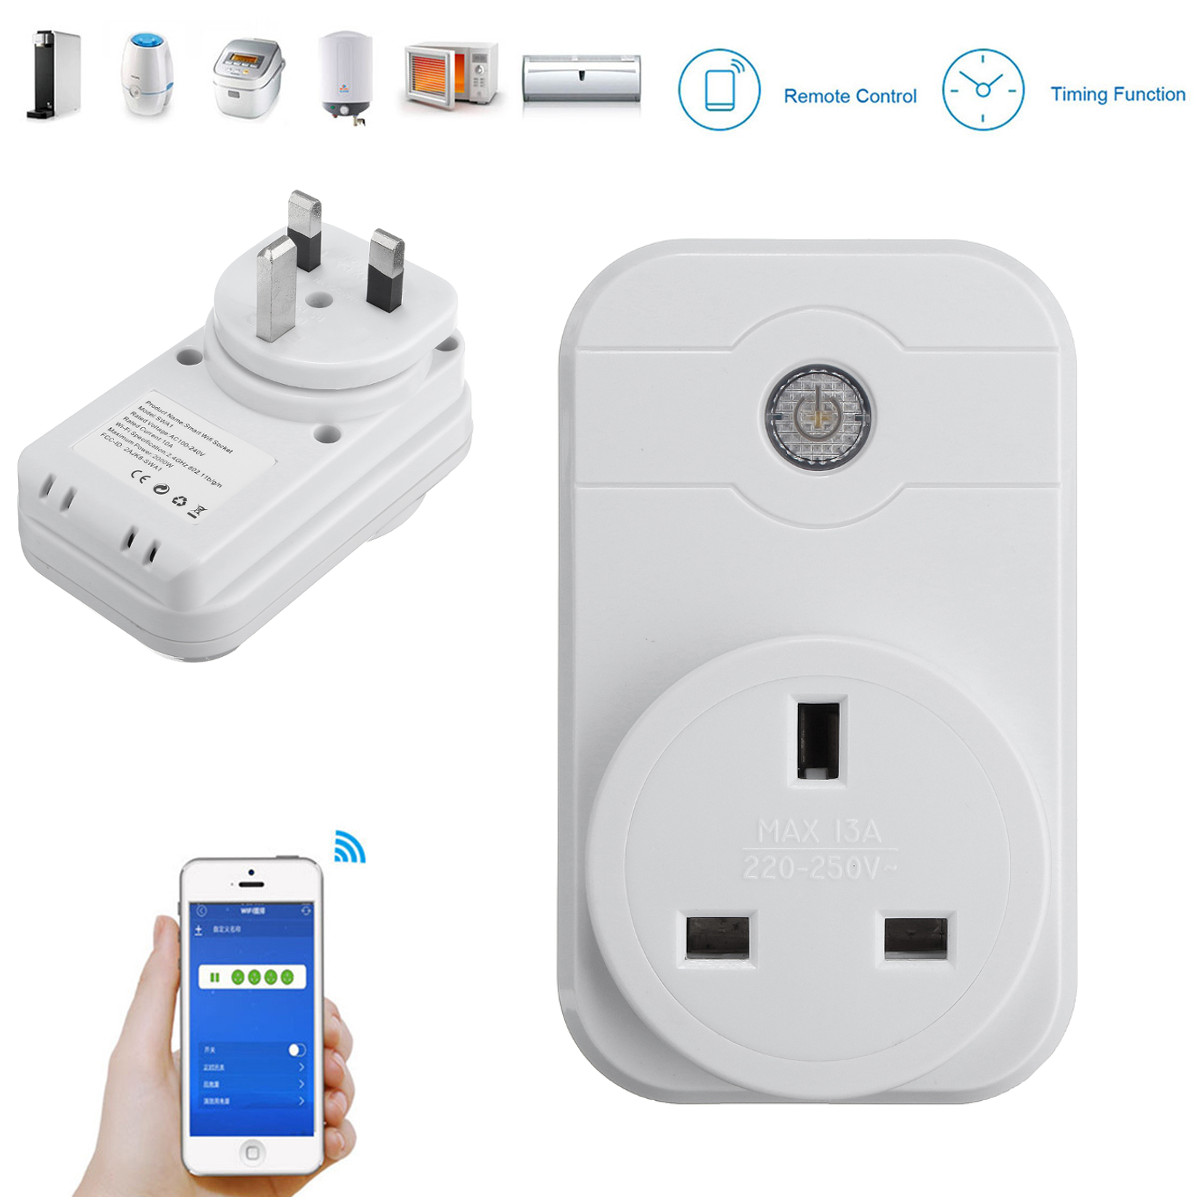 SW2 WiFi Remote Control Smart Socket Home Switch UK Plug for iPhone 7/7Plus Samsung S8 Xiaomi